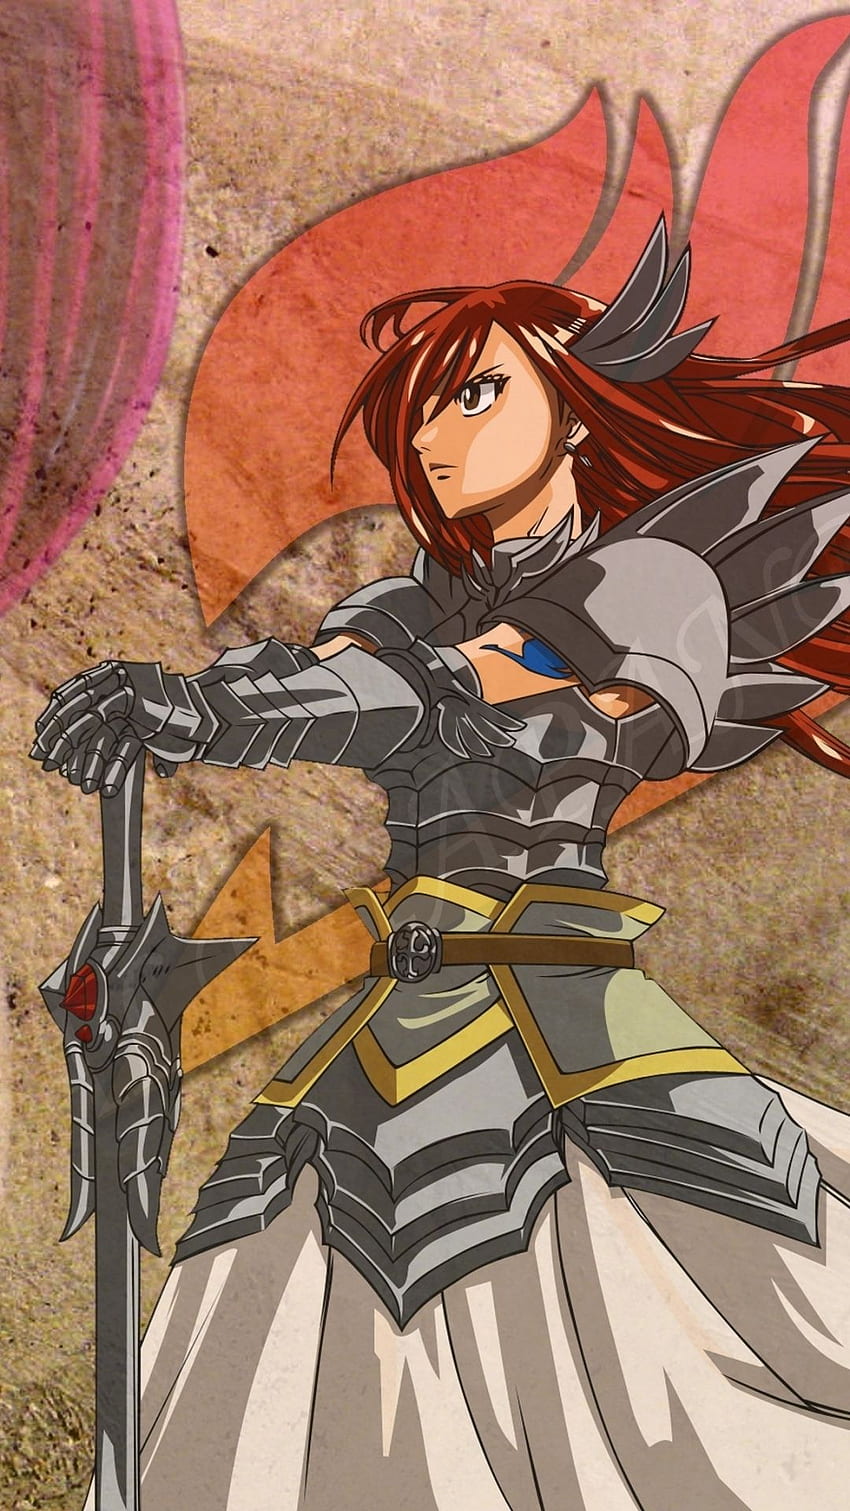 Fairy Tail Erza Hupages iPhone . Fairy tale anime, Fairy tail anime, Fairy tail, Erza Scarlet Android HD phone wallpaper